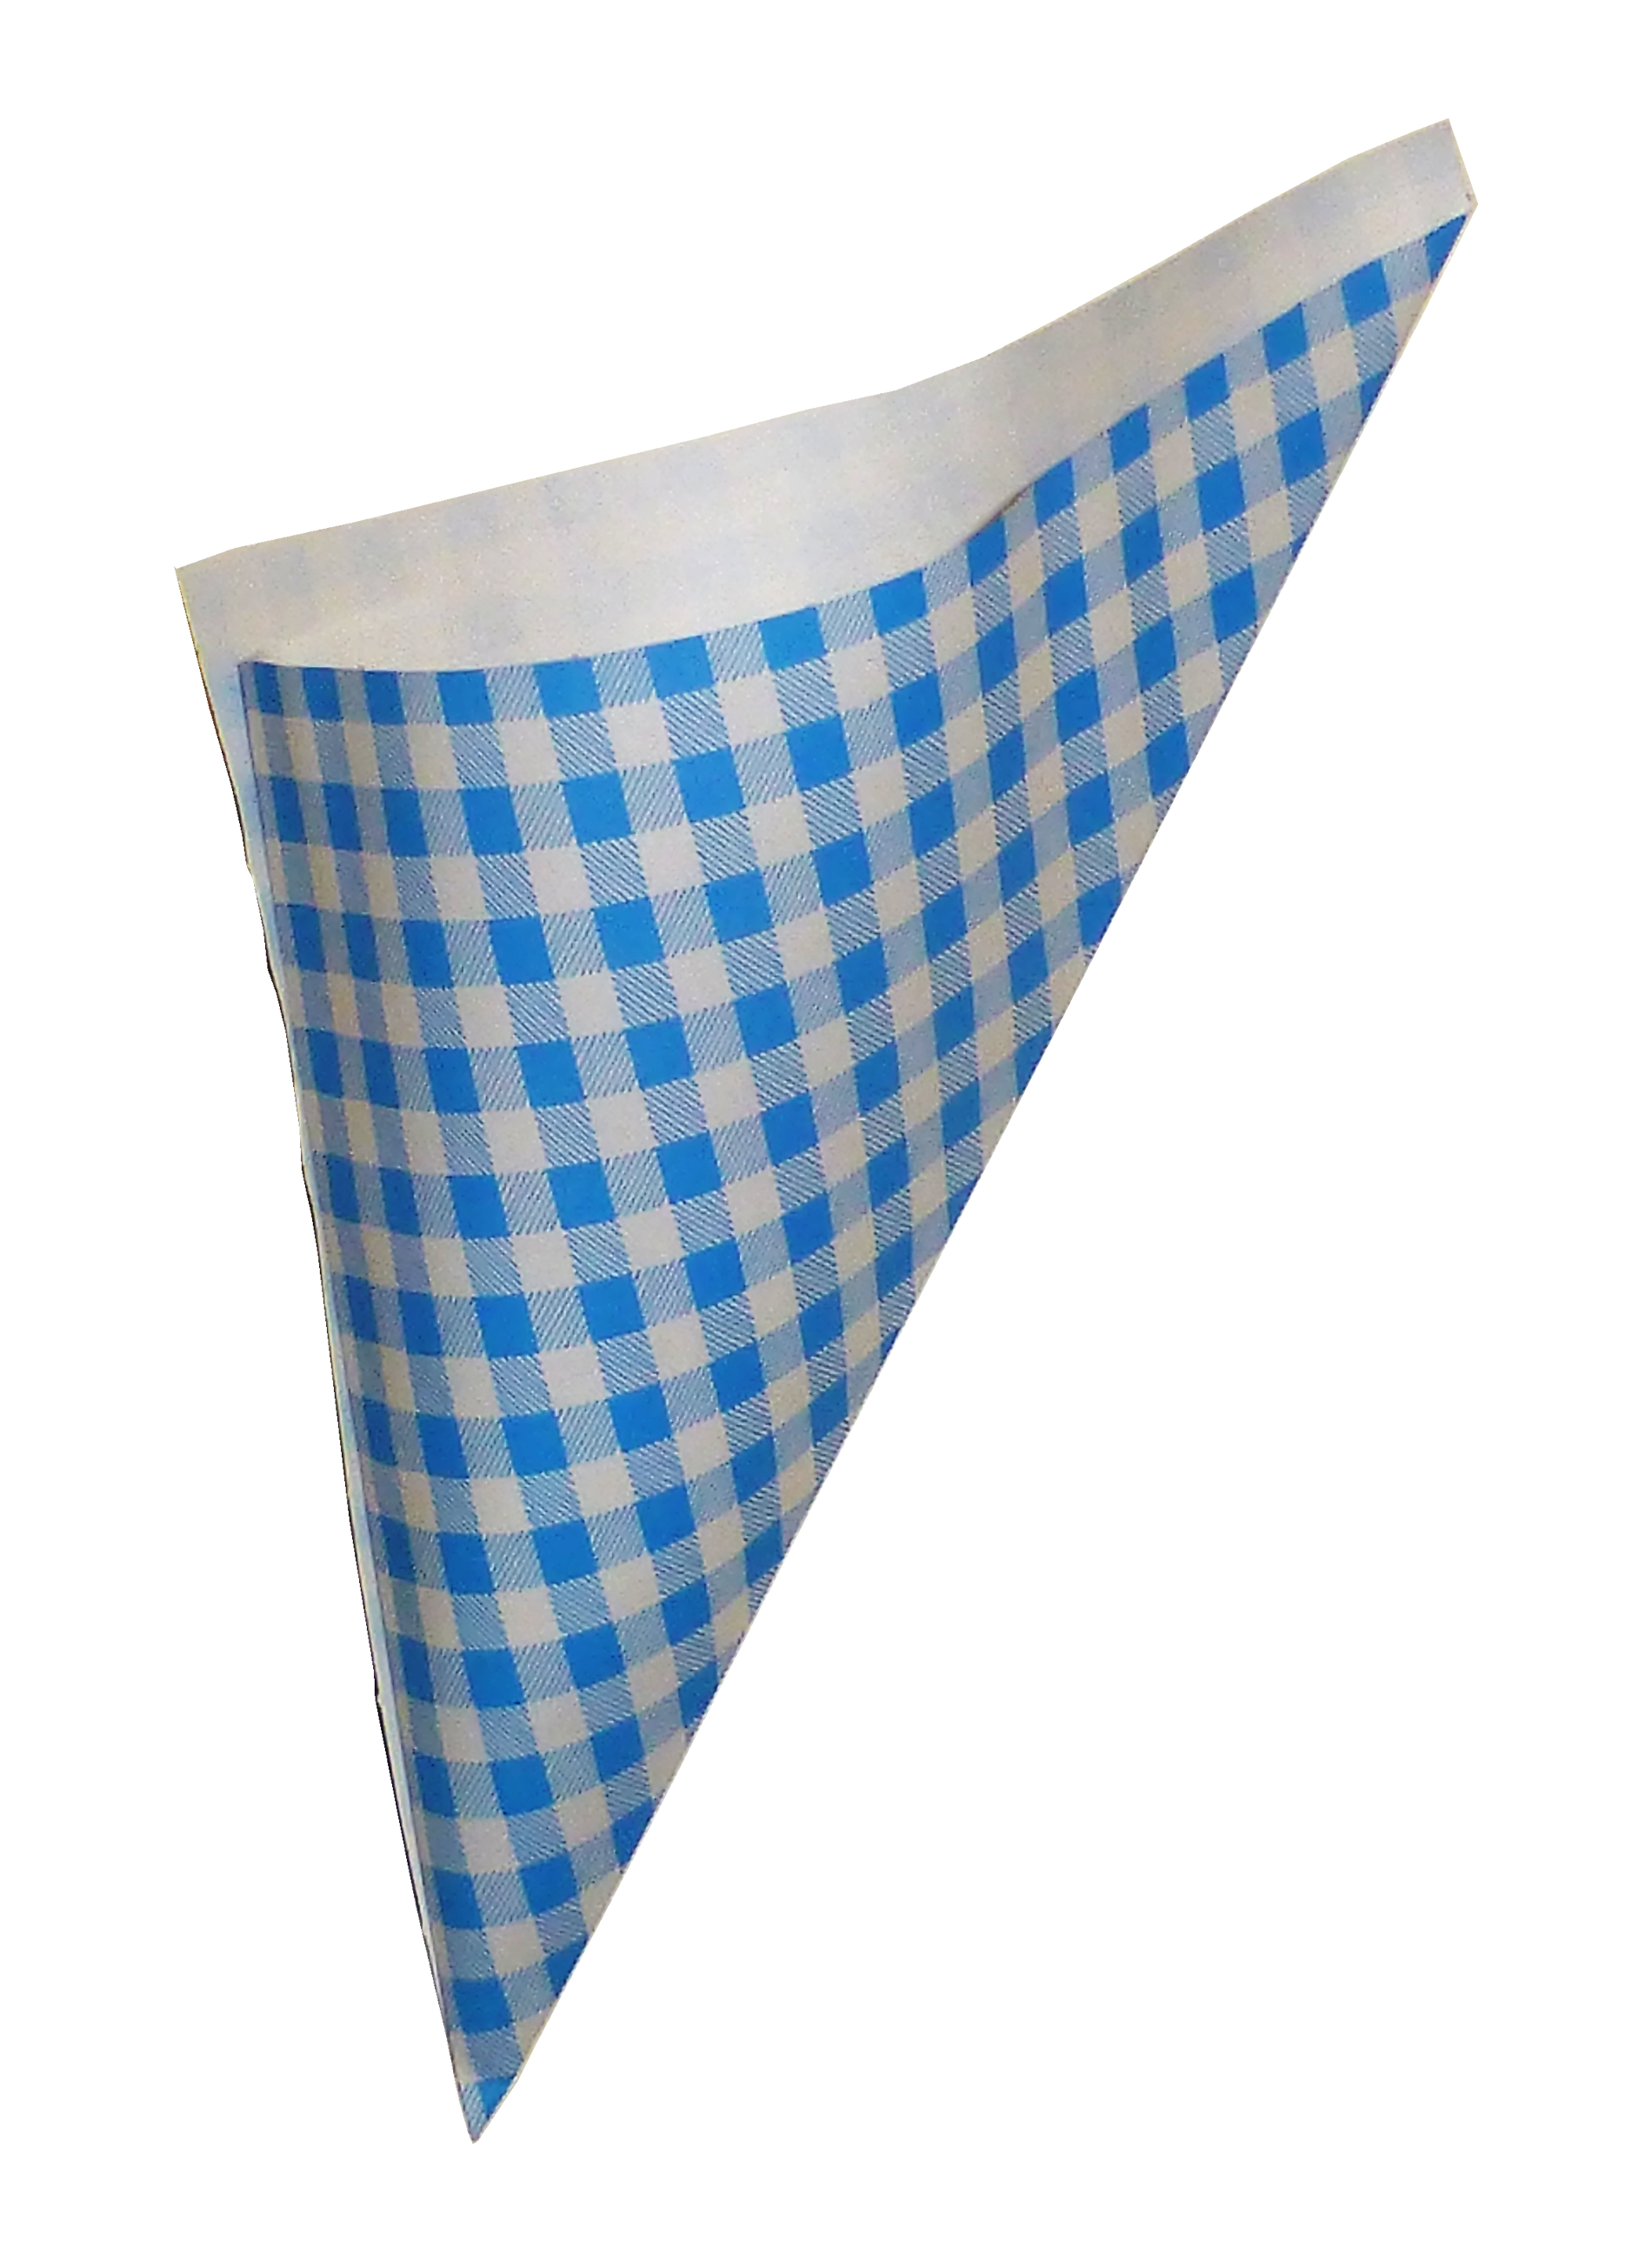 Large K-18 Blue And White Paper Cones, 400 Cones, Holds 9.5 Oz. BLOWOUT SALE, $0.12 per cone